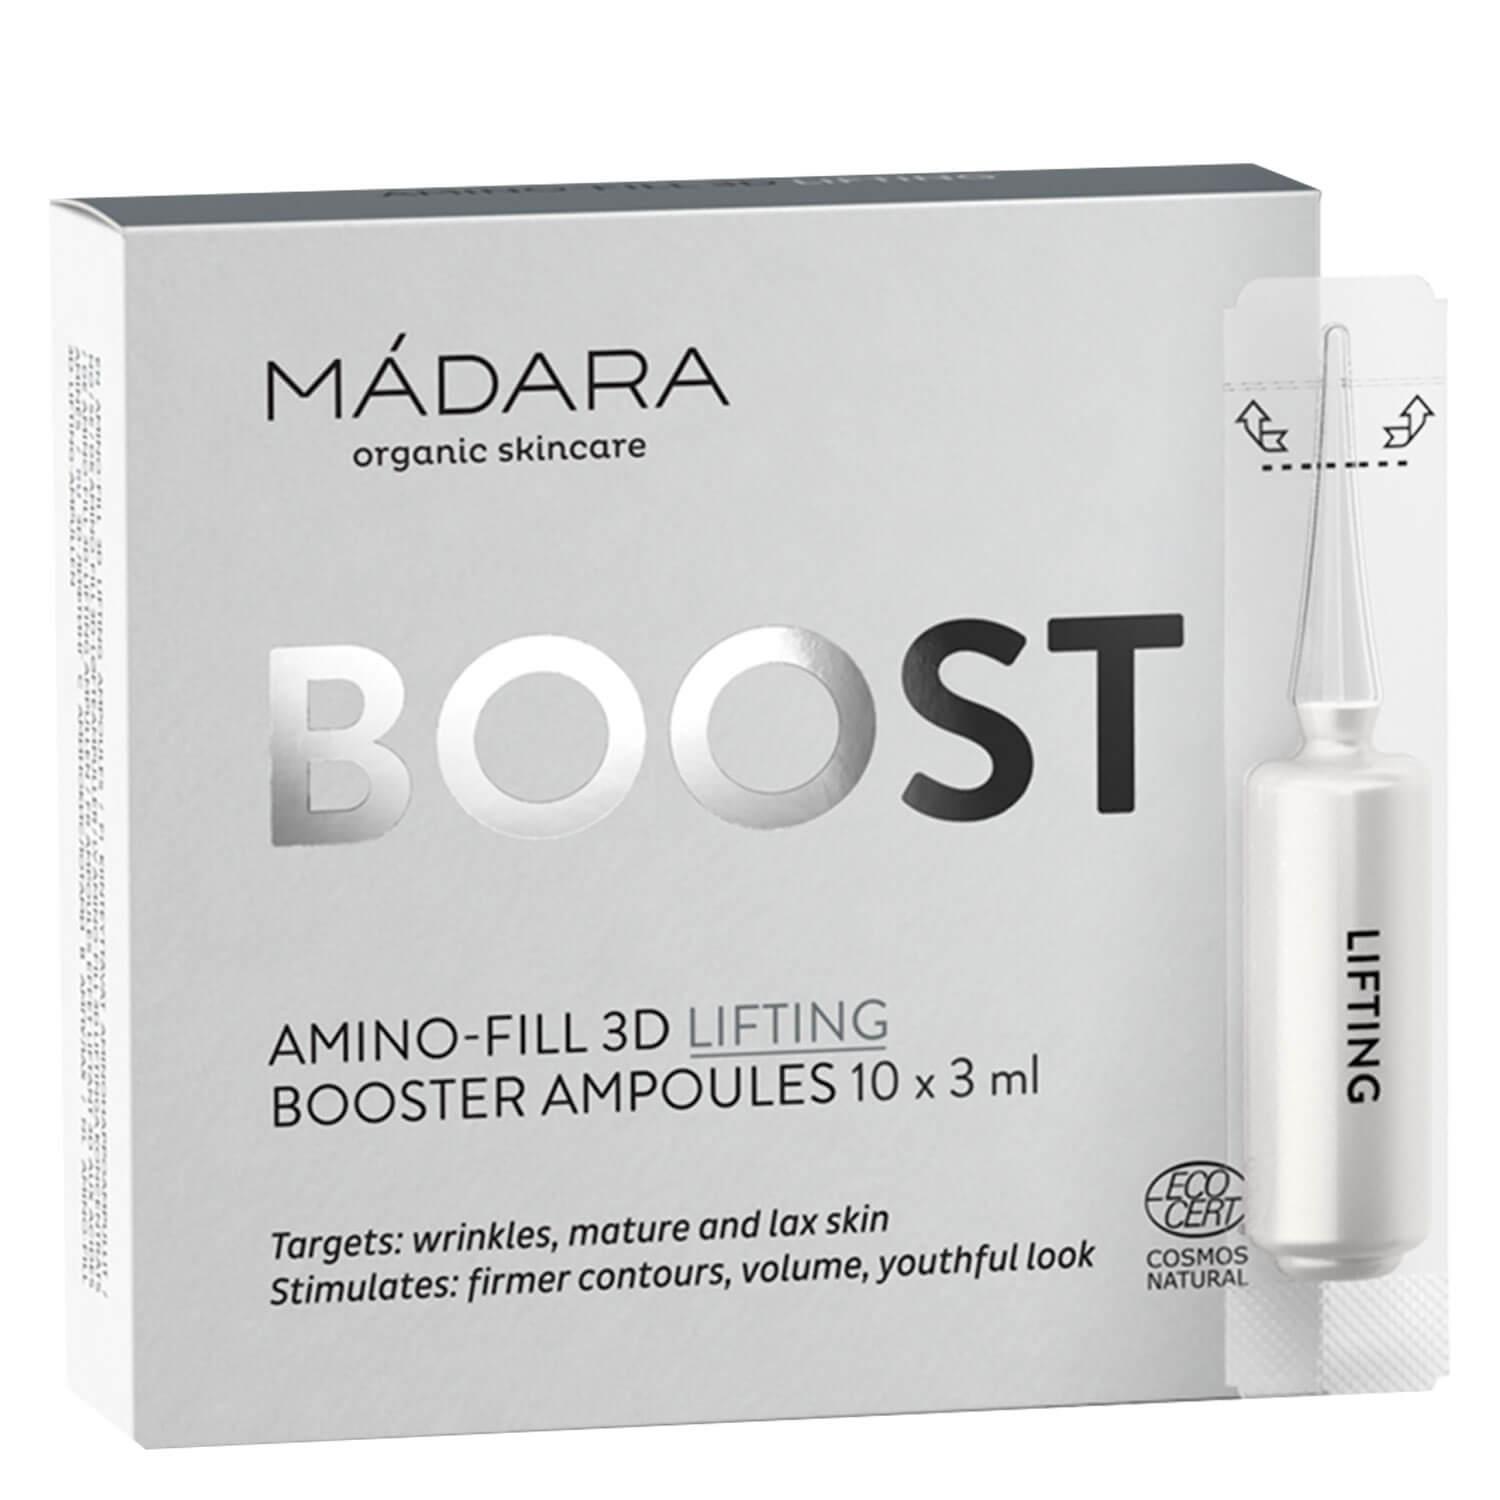 MÁDARA Care - Amino-Fill 3D Lifting Booster Ampoules